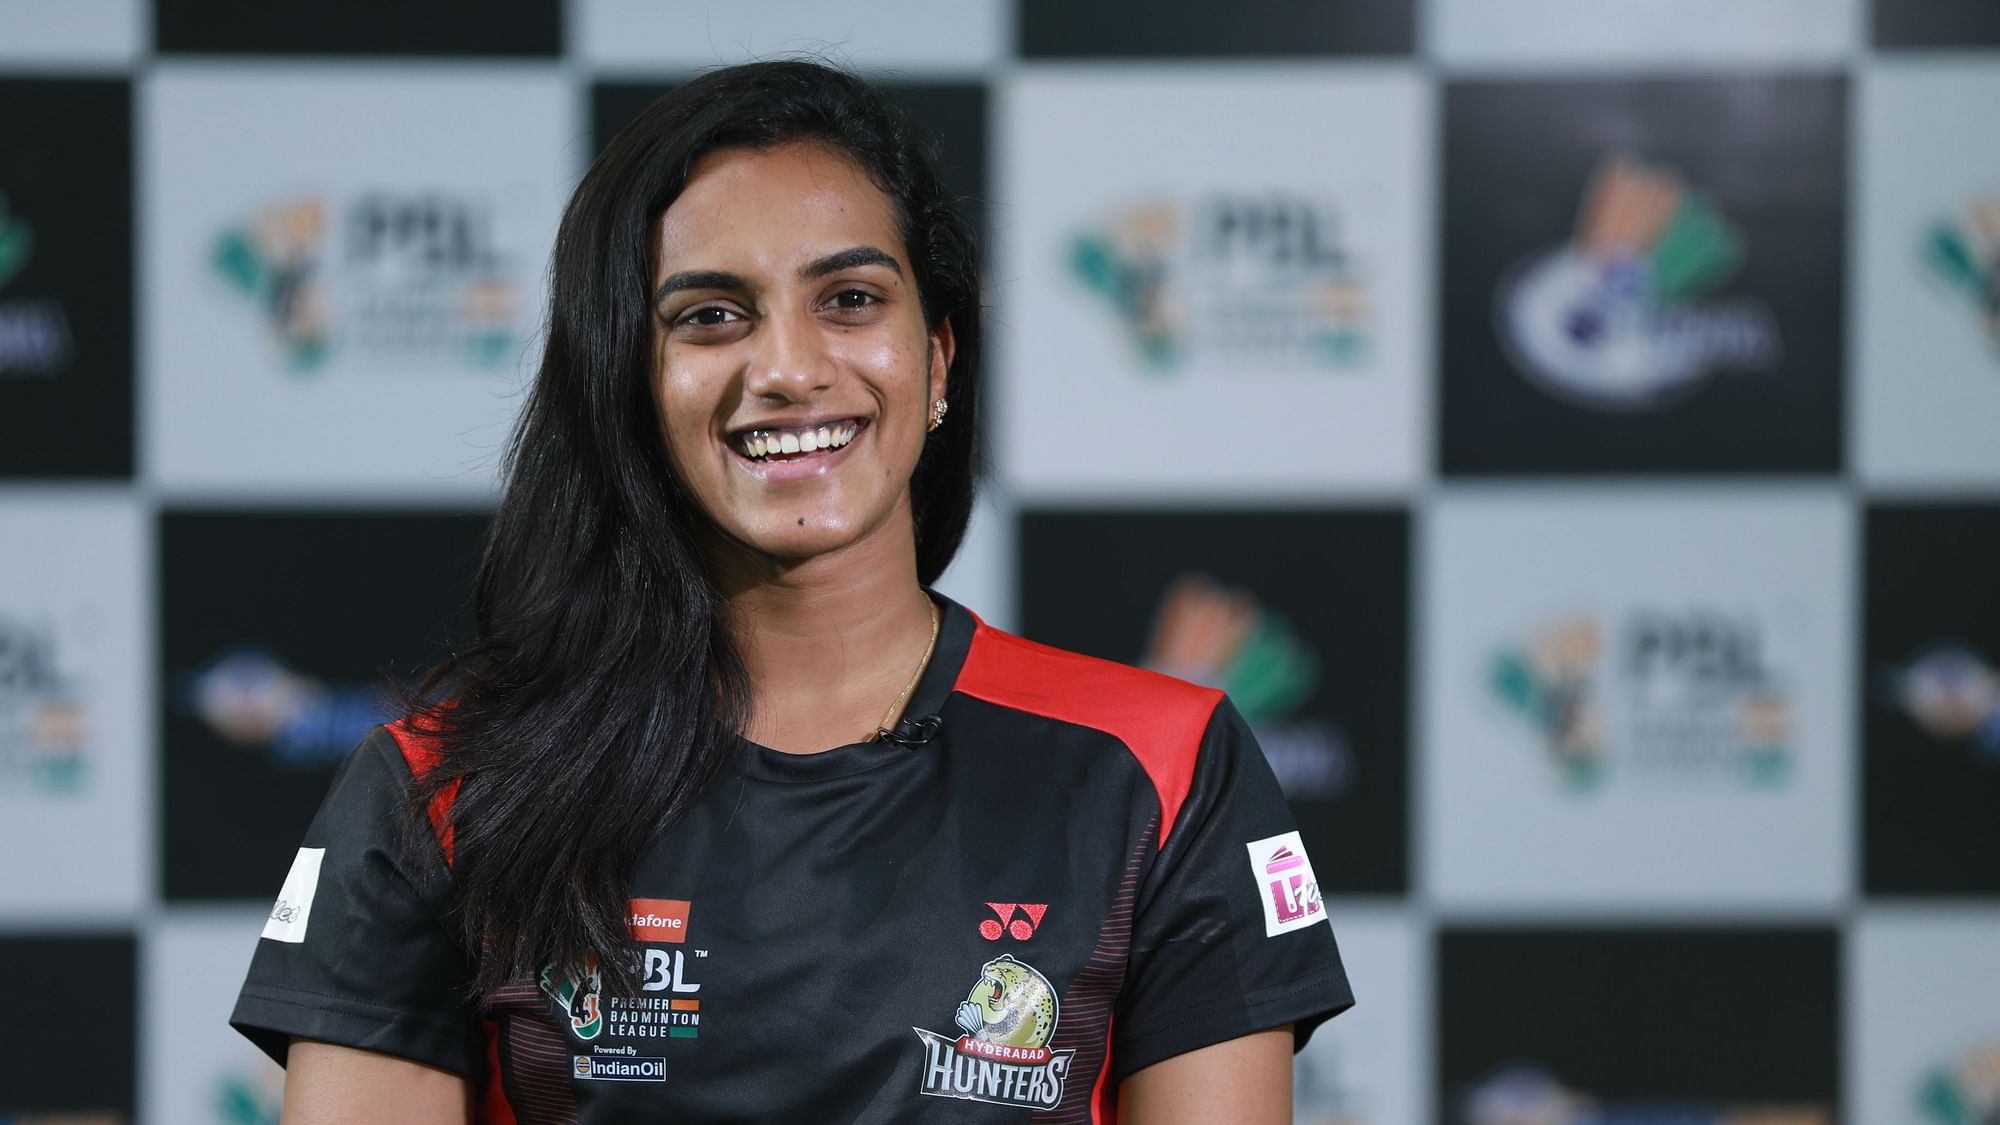 World champion PV Sindhu said sky-high expectation from her makes her work even harder as she aims at a second medal in the upcoming Tokyo Olympics in July-August.